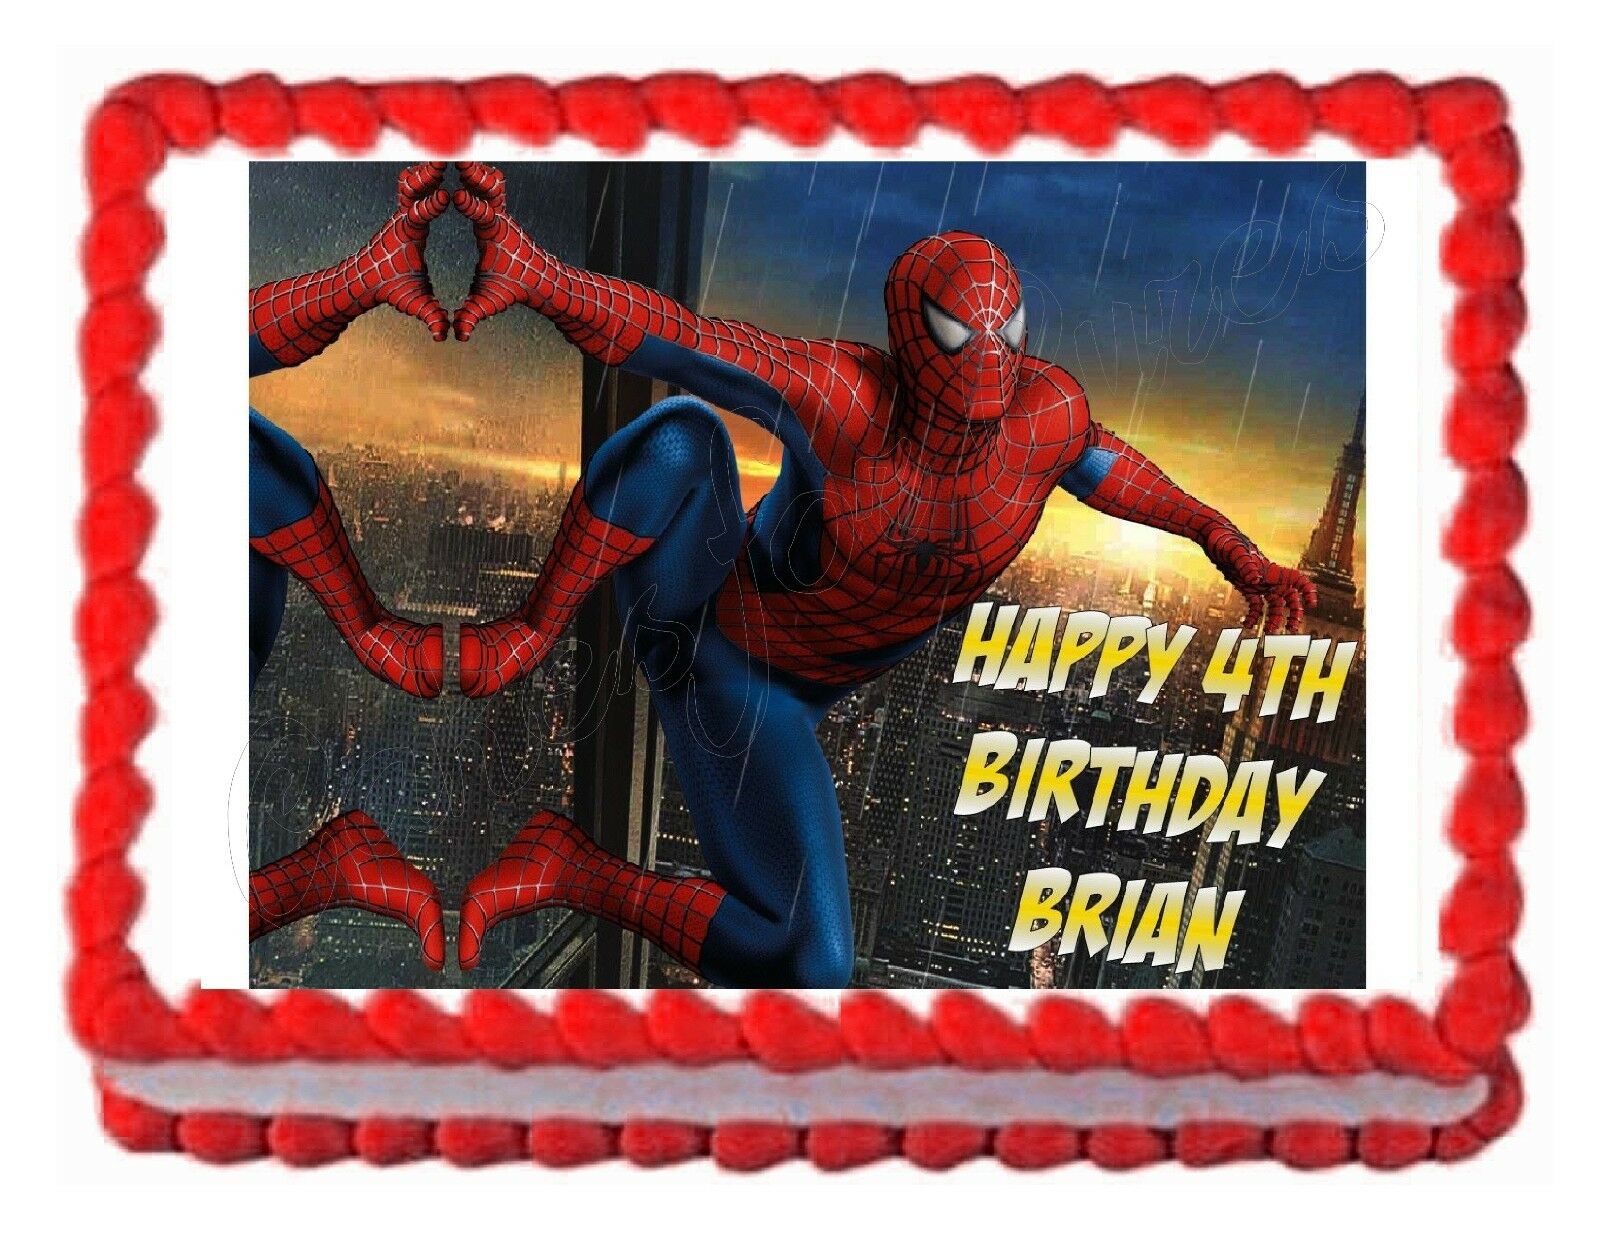 How to Make a Spiderman Cake : 10 Steps (with Pictures) - Instructables